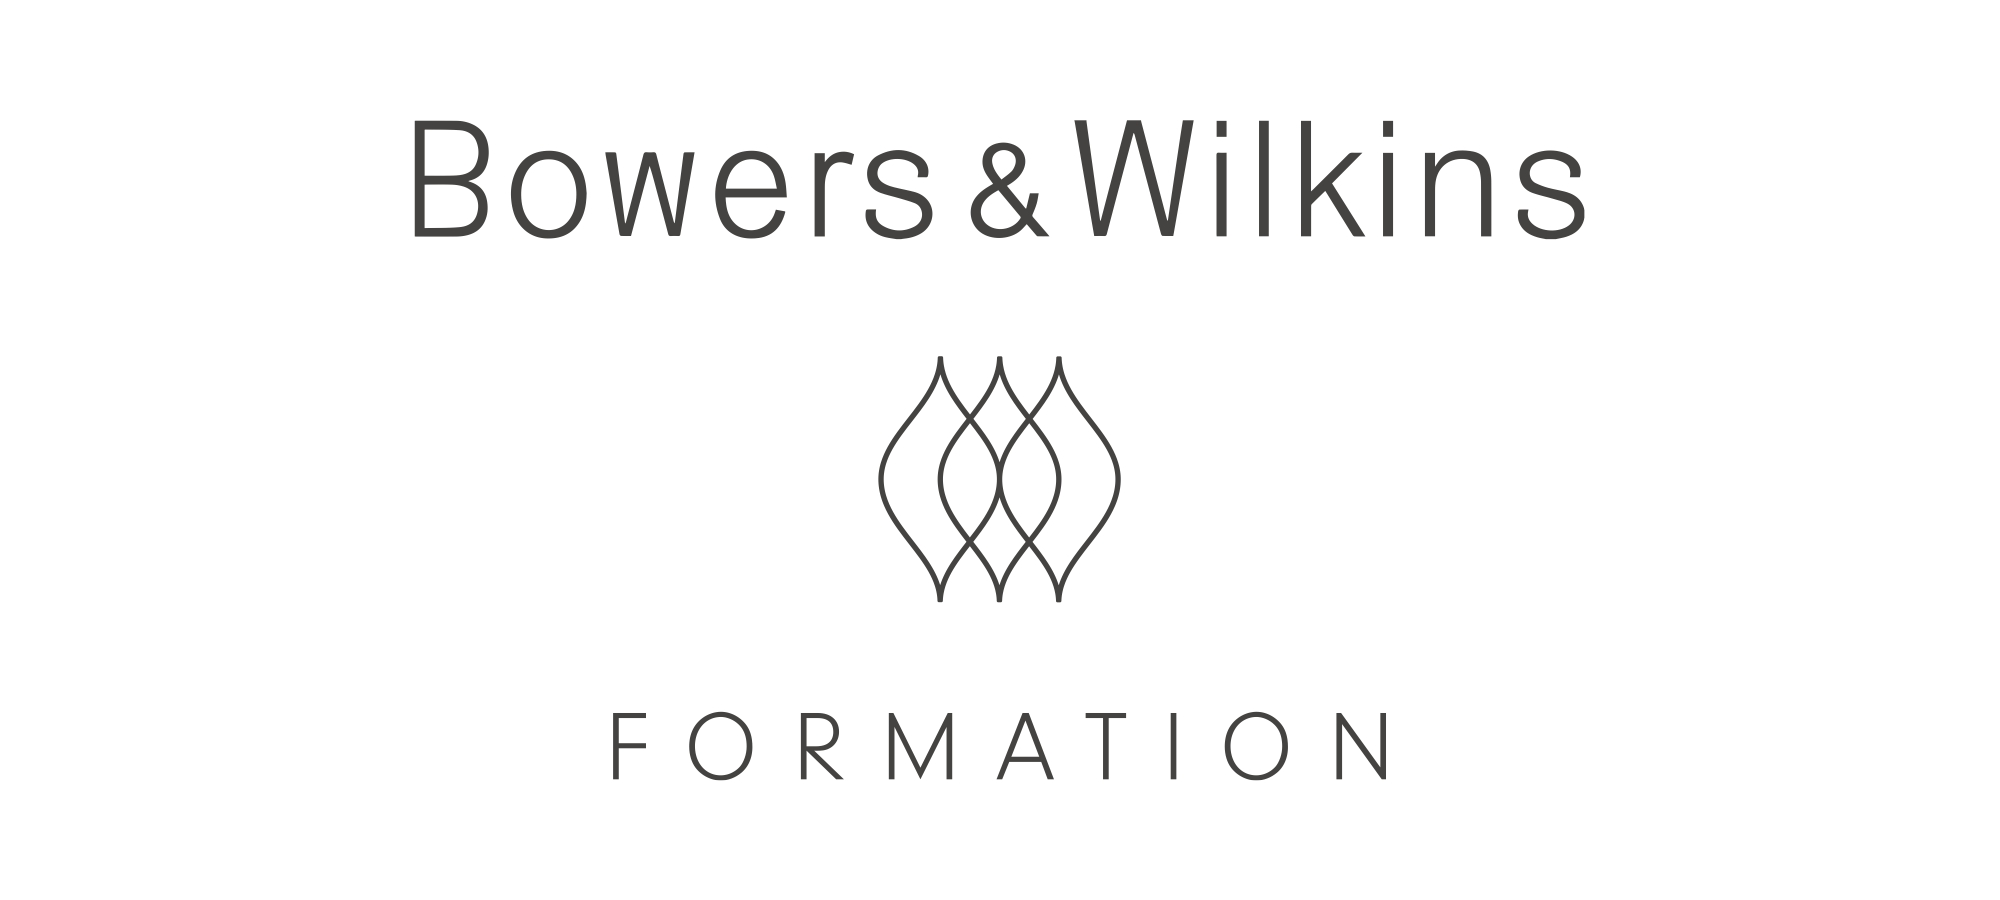 bowers and wilkins logo